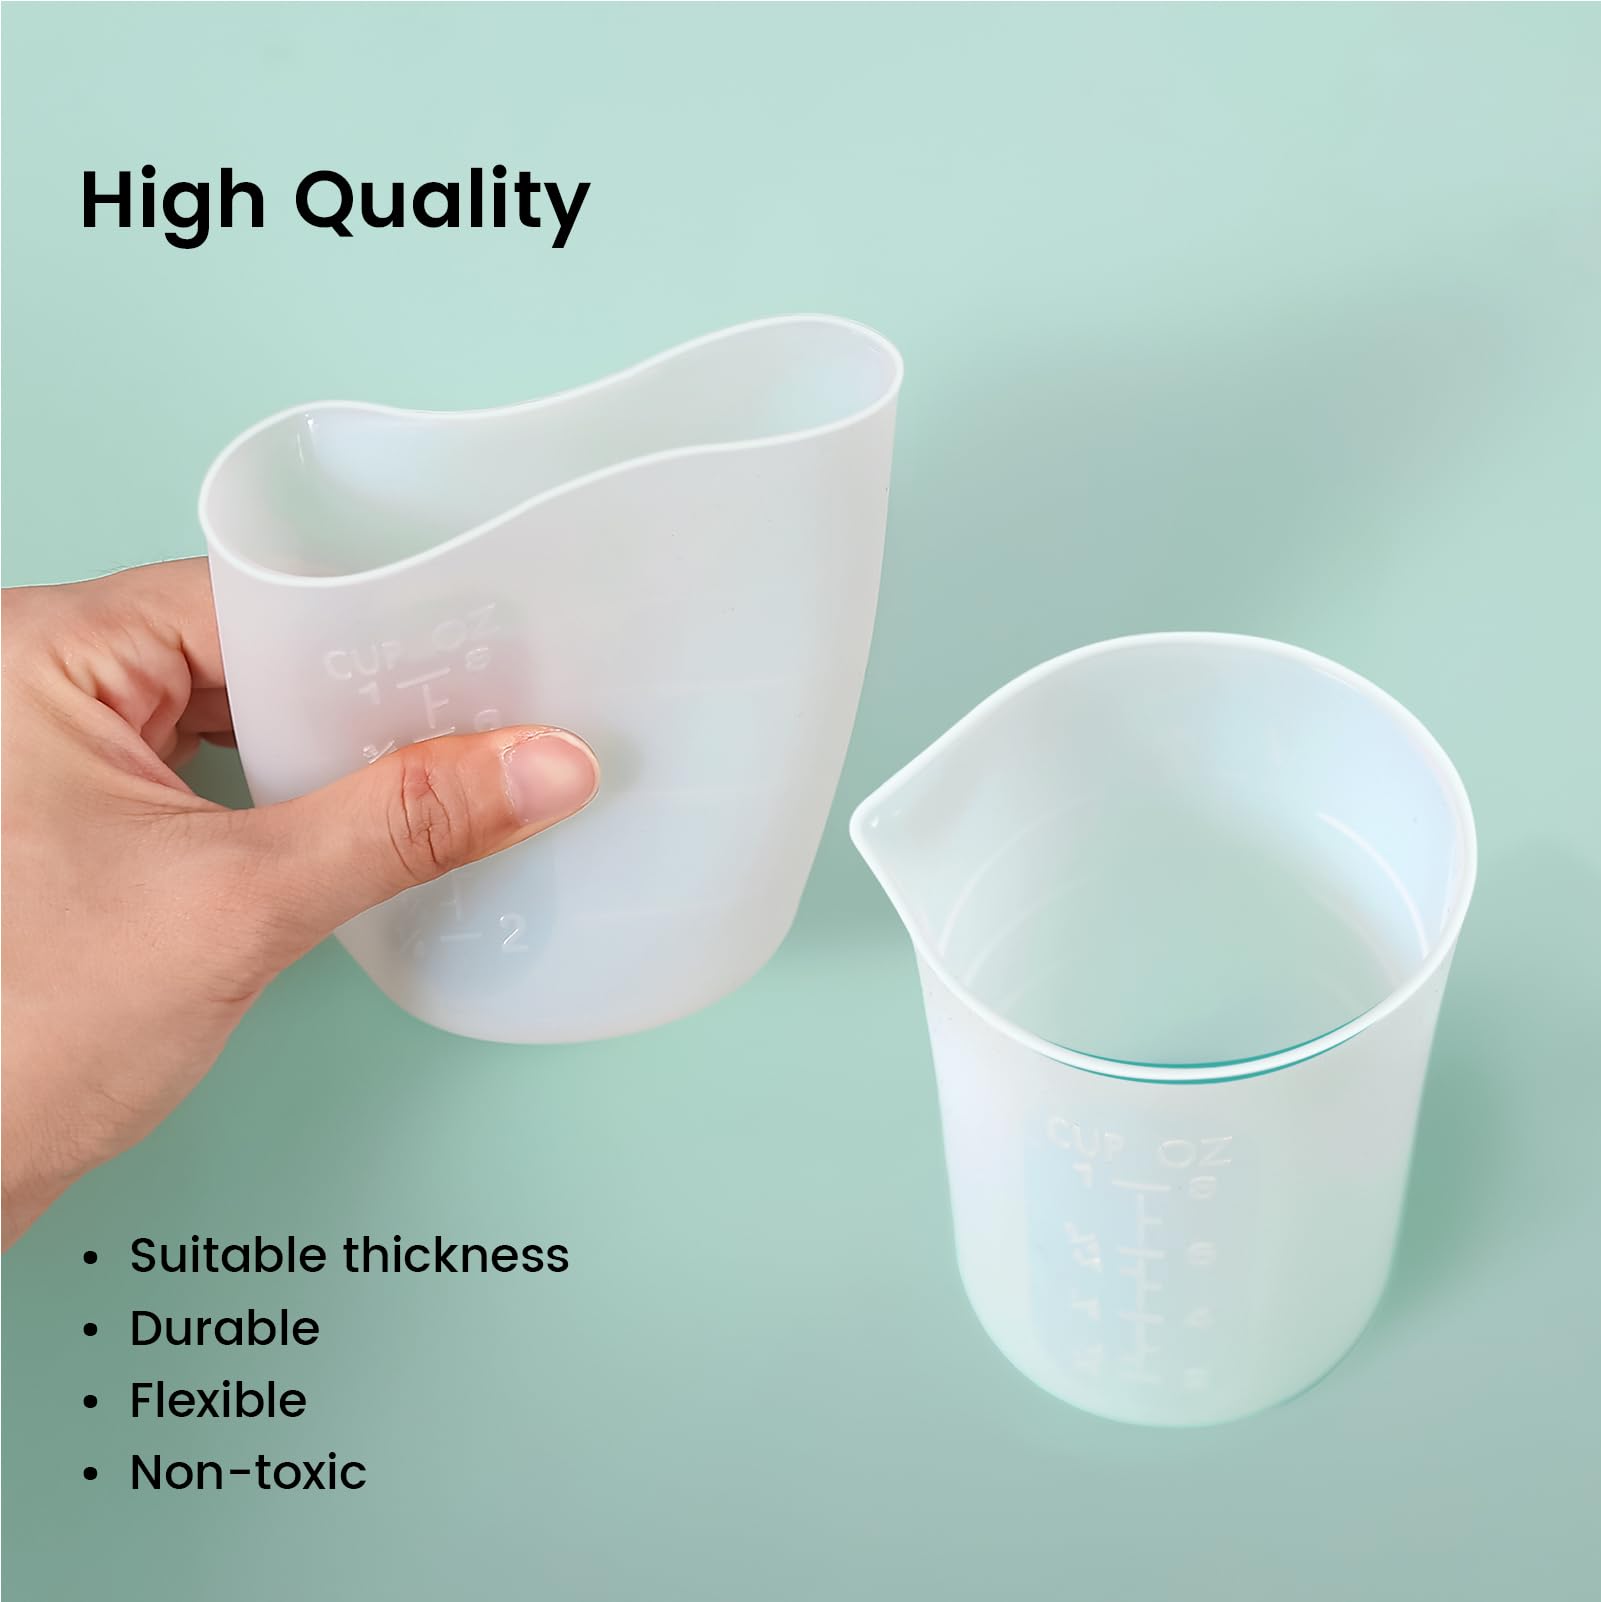 1 Set mixing cups Silicone Resin Measuring Cups Tools Stir Sticks Diy  Silicone